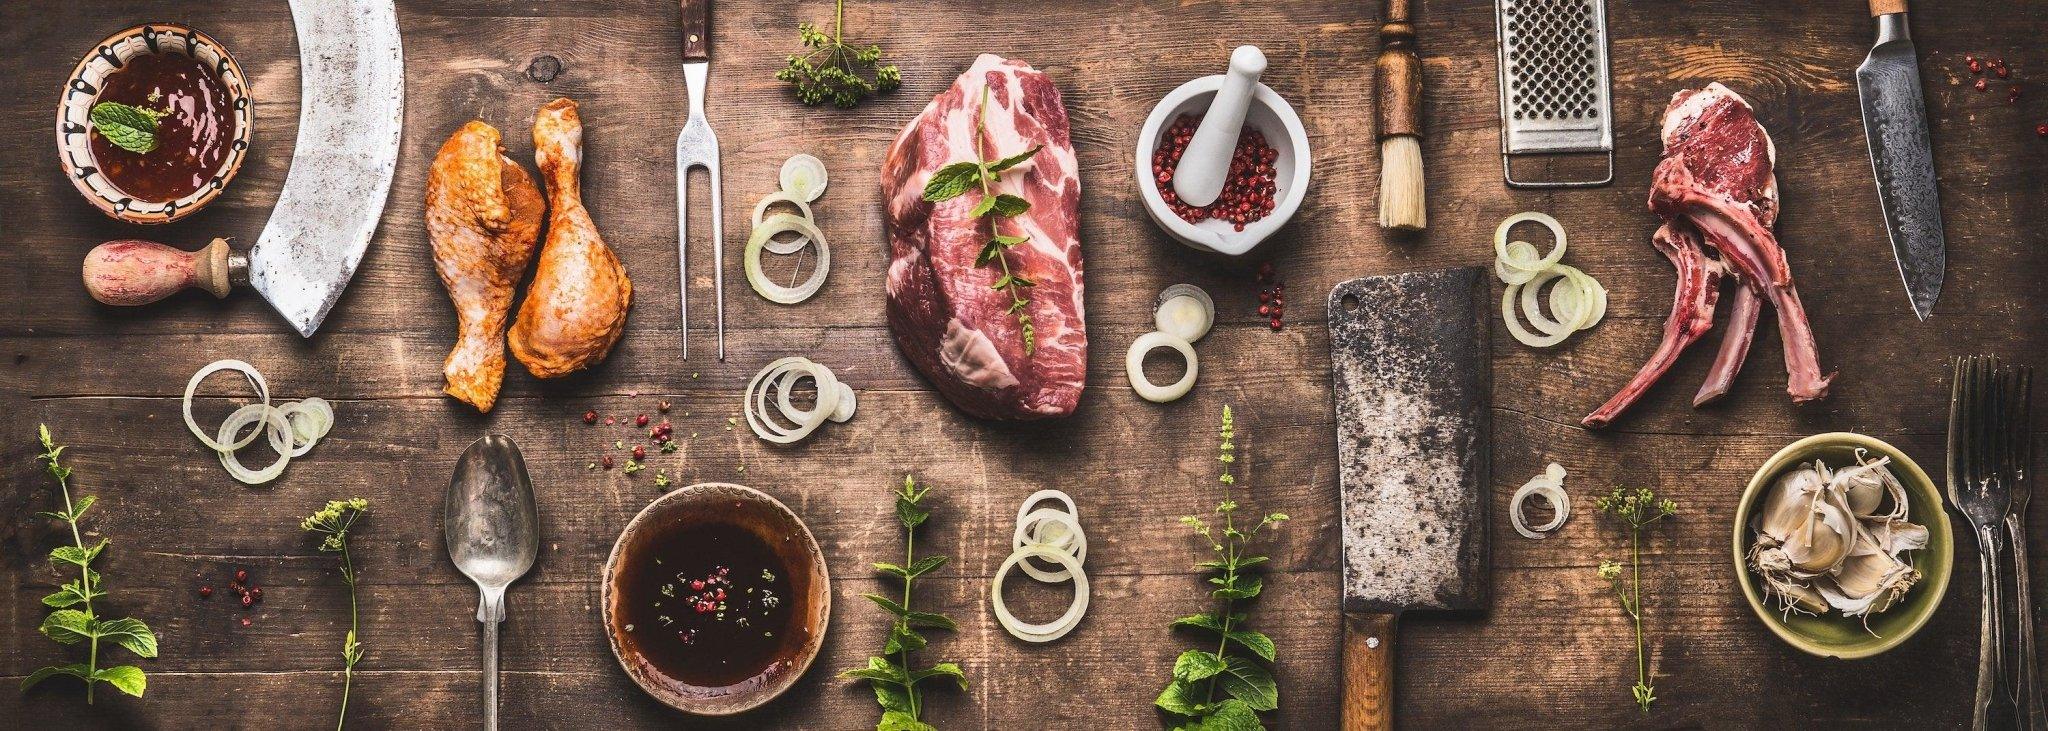 Carefully Curated Meat Dishes - Jane Foodie